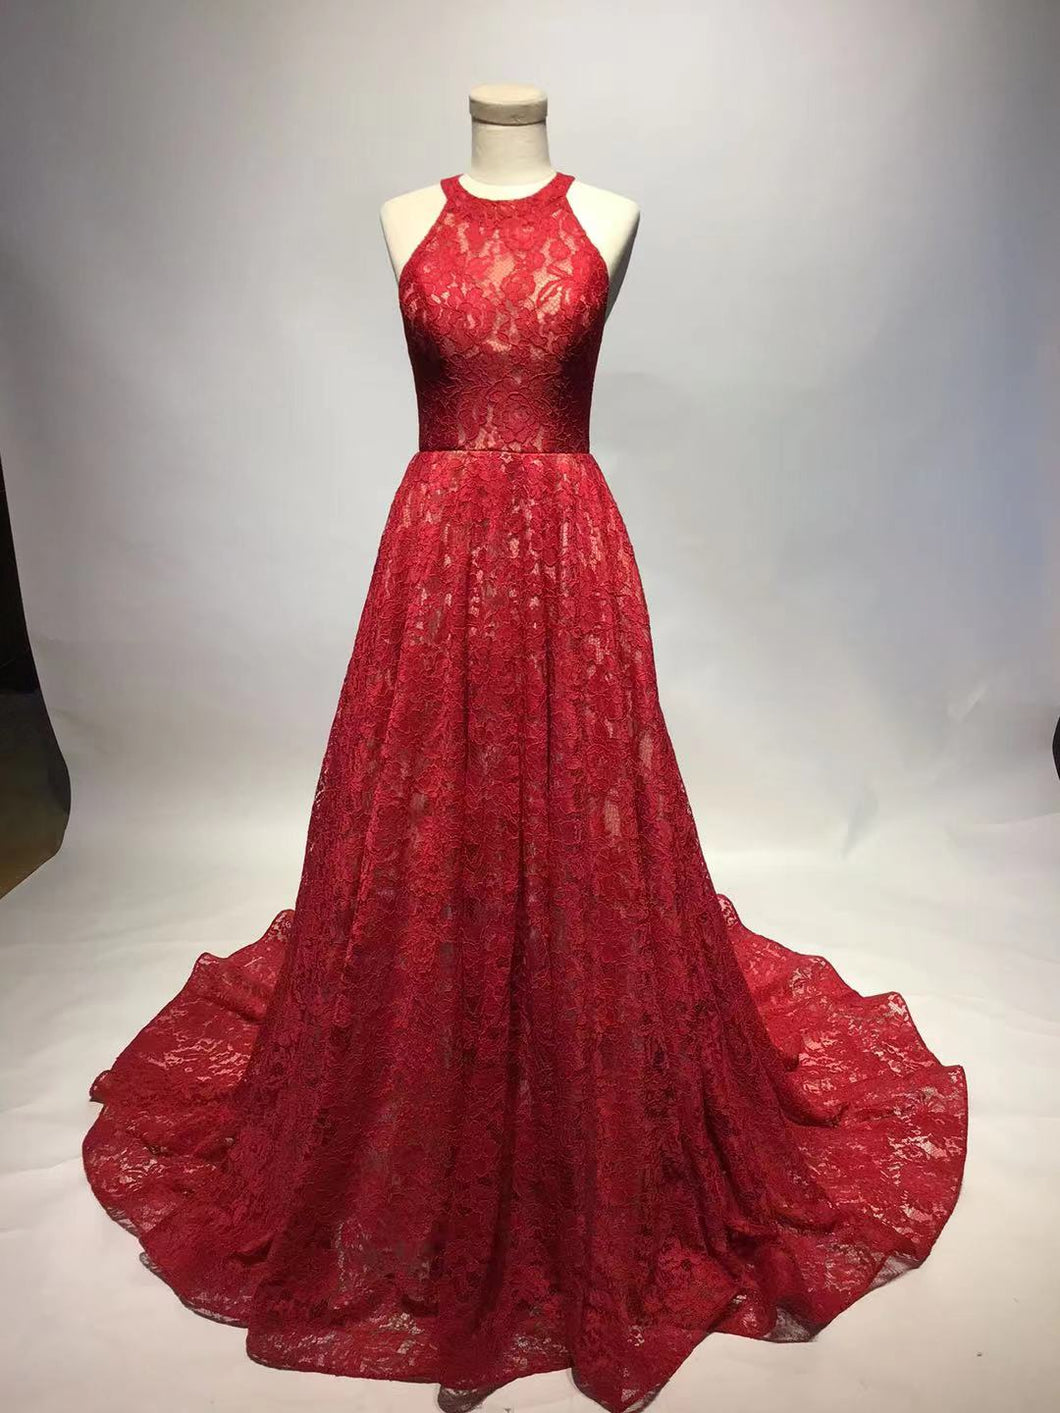 Style DOL39a - Halter style red lace evening gown for SALE